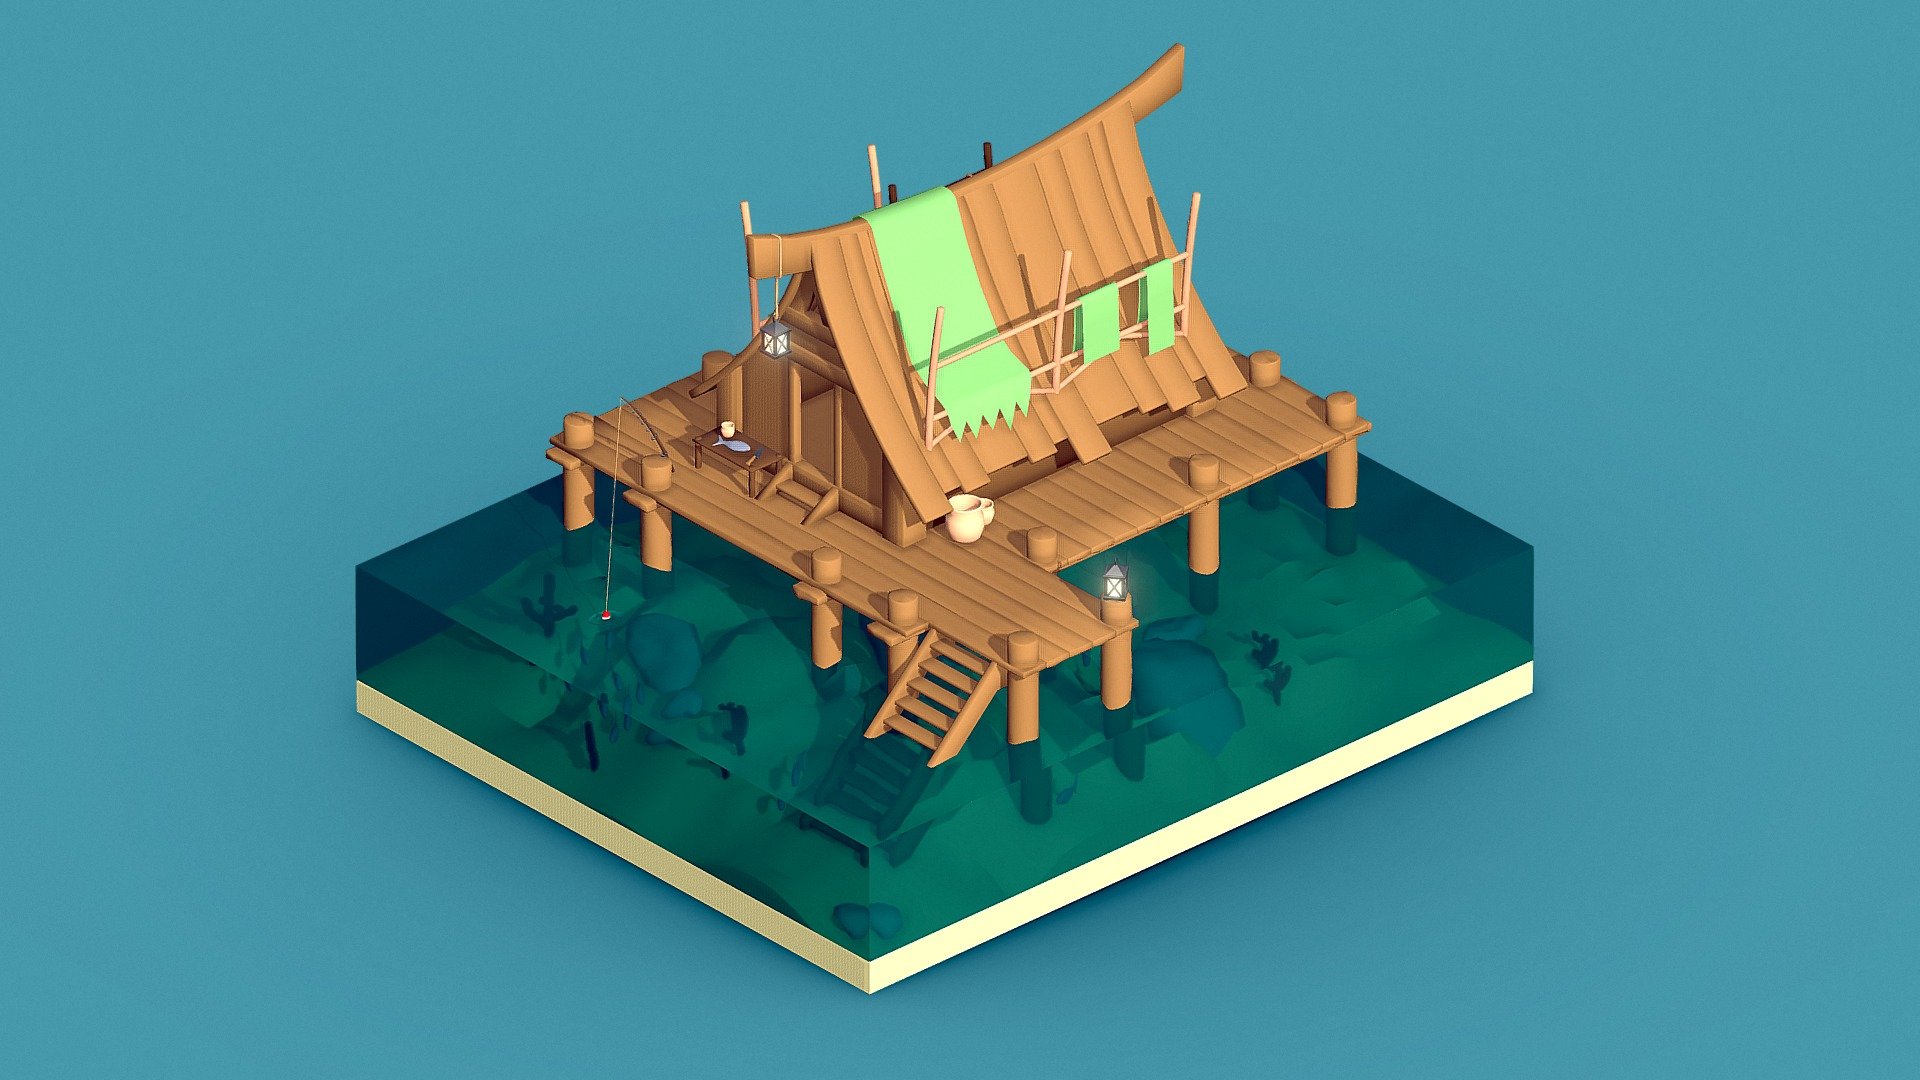 Tiny Fishing House for #TinyCabinChallenge
This is the story of a fisherman living near a paradise island
Modeled and colored with blender - Tiny Fishing House - #TinyCabinChallenge - 3D model by Vincent Fondevila (@vincentfvs) 3d model